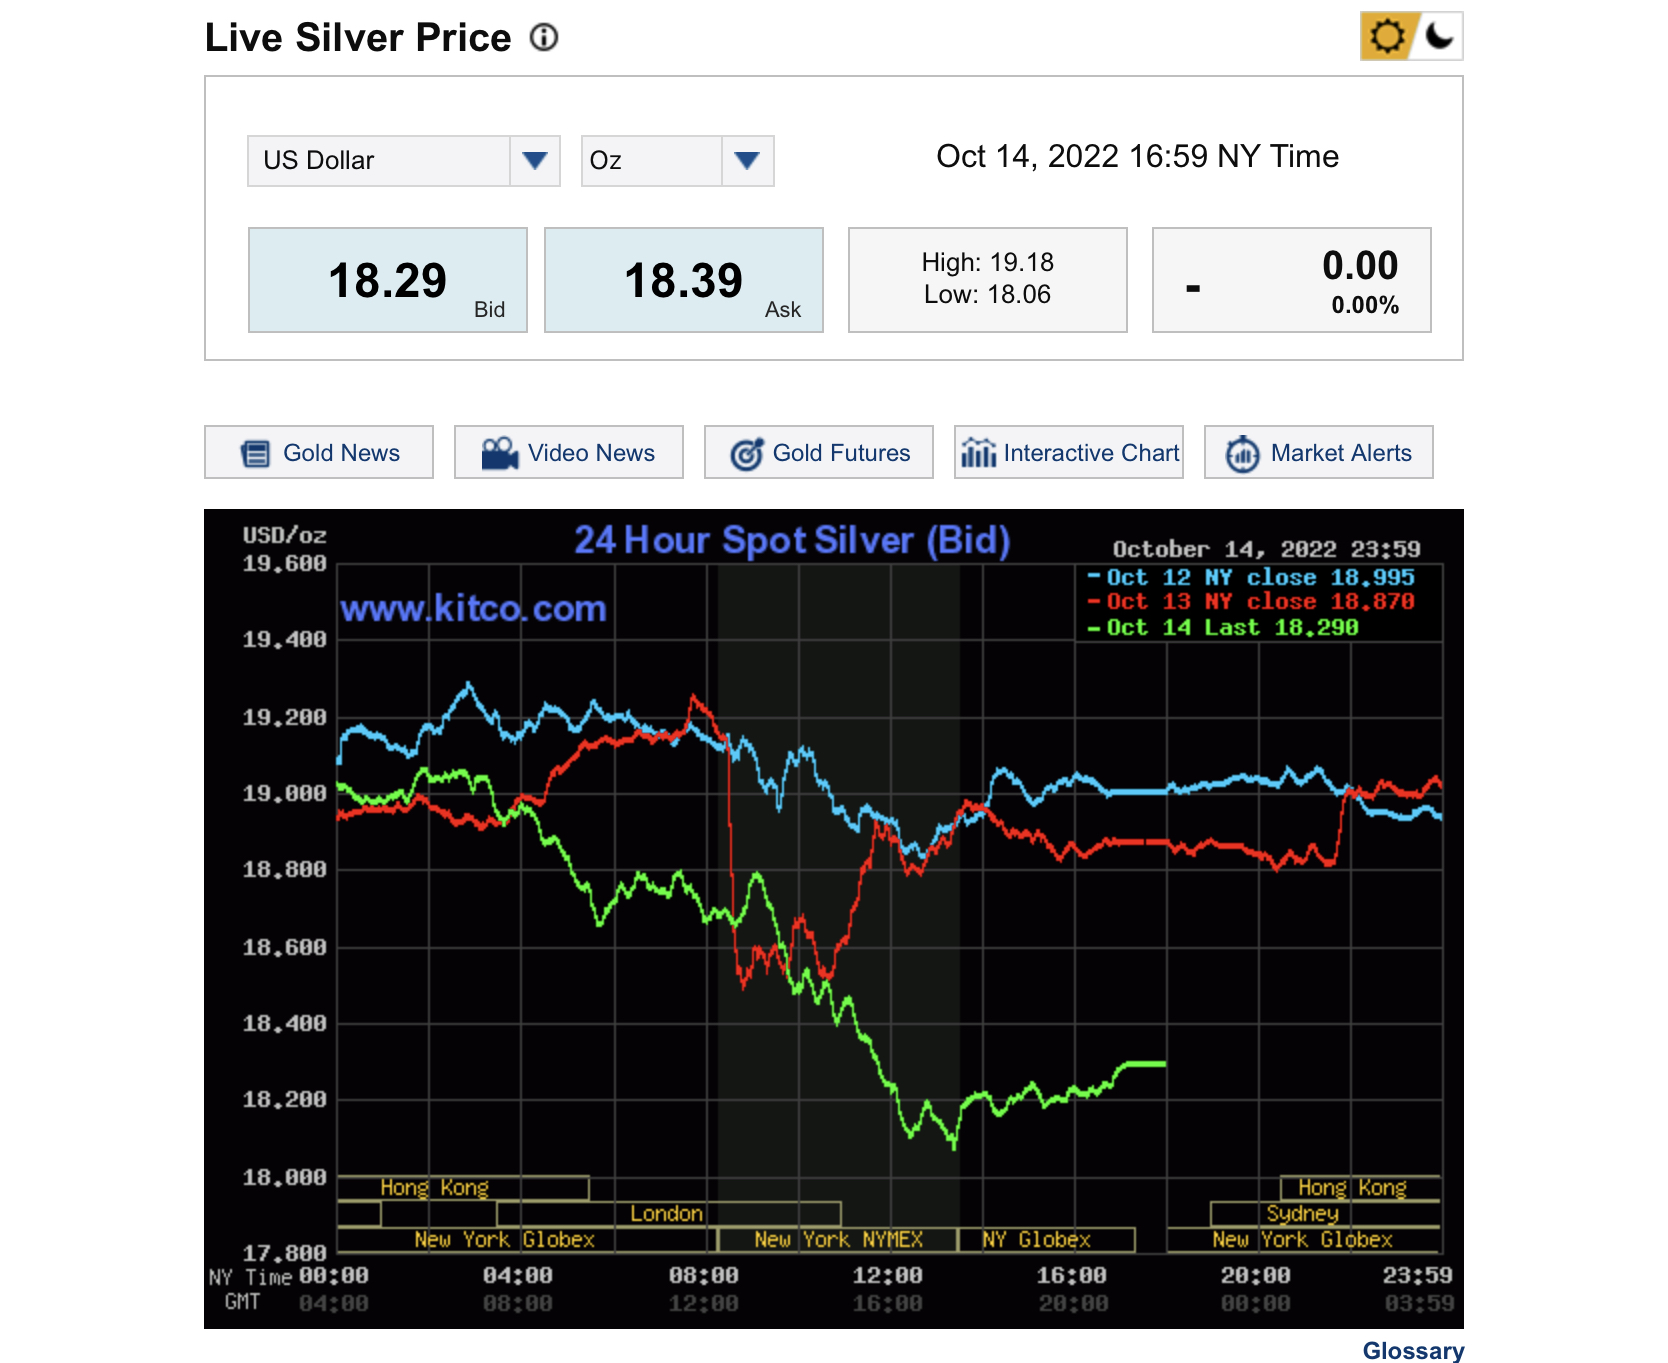 silver-drops-back-to-usd18-gold-dropping-also-blurt